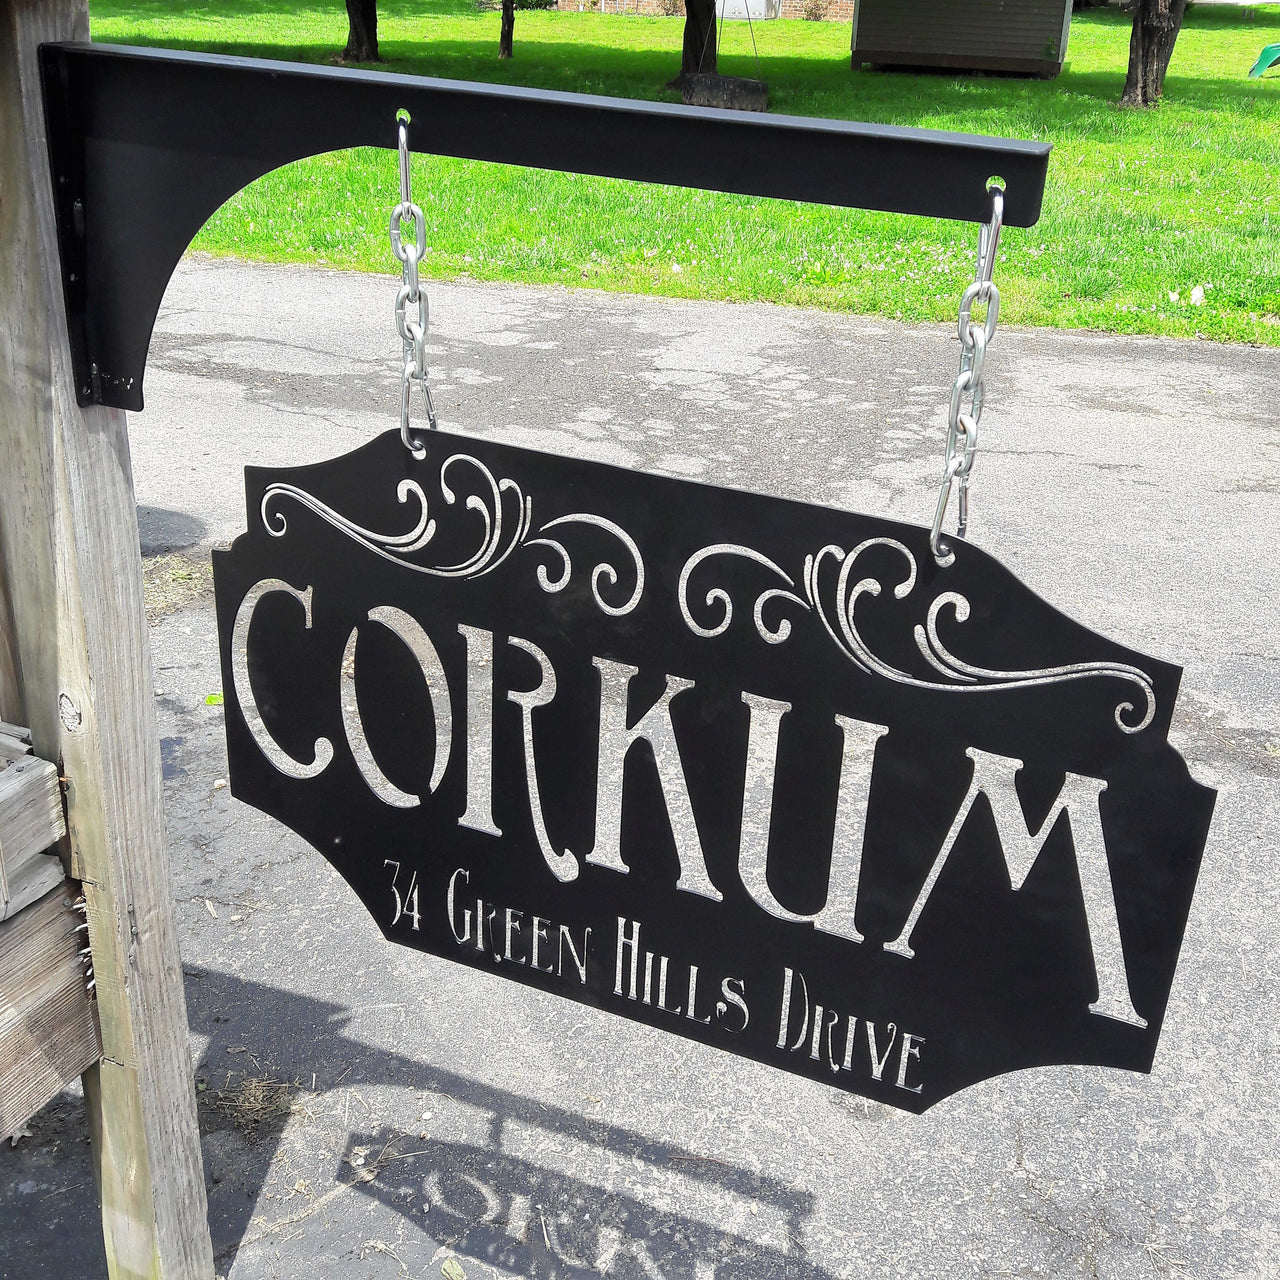 This custom metal sign is Powdercoated and comes with a matching hanging post, silver chain and carabiners. The hanging sign reads, "Corkum in Green Hills Drive". it is an address sign